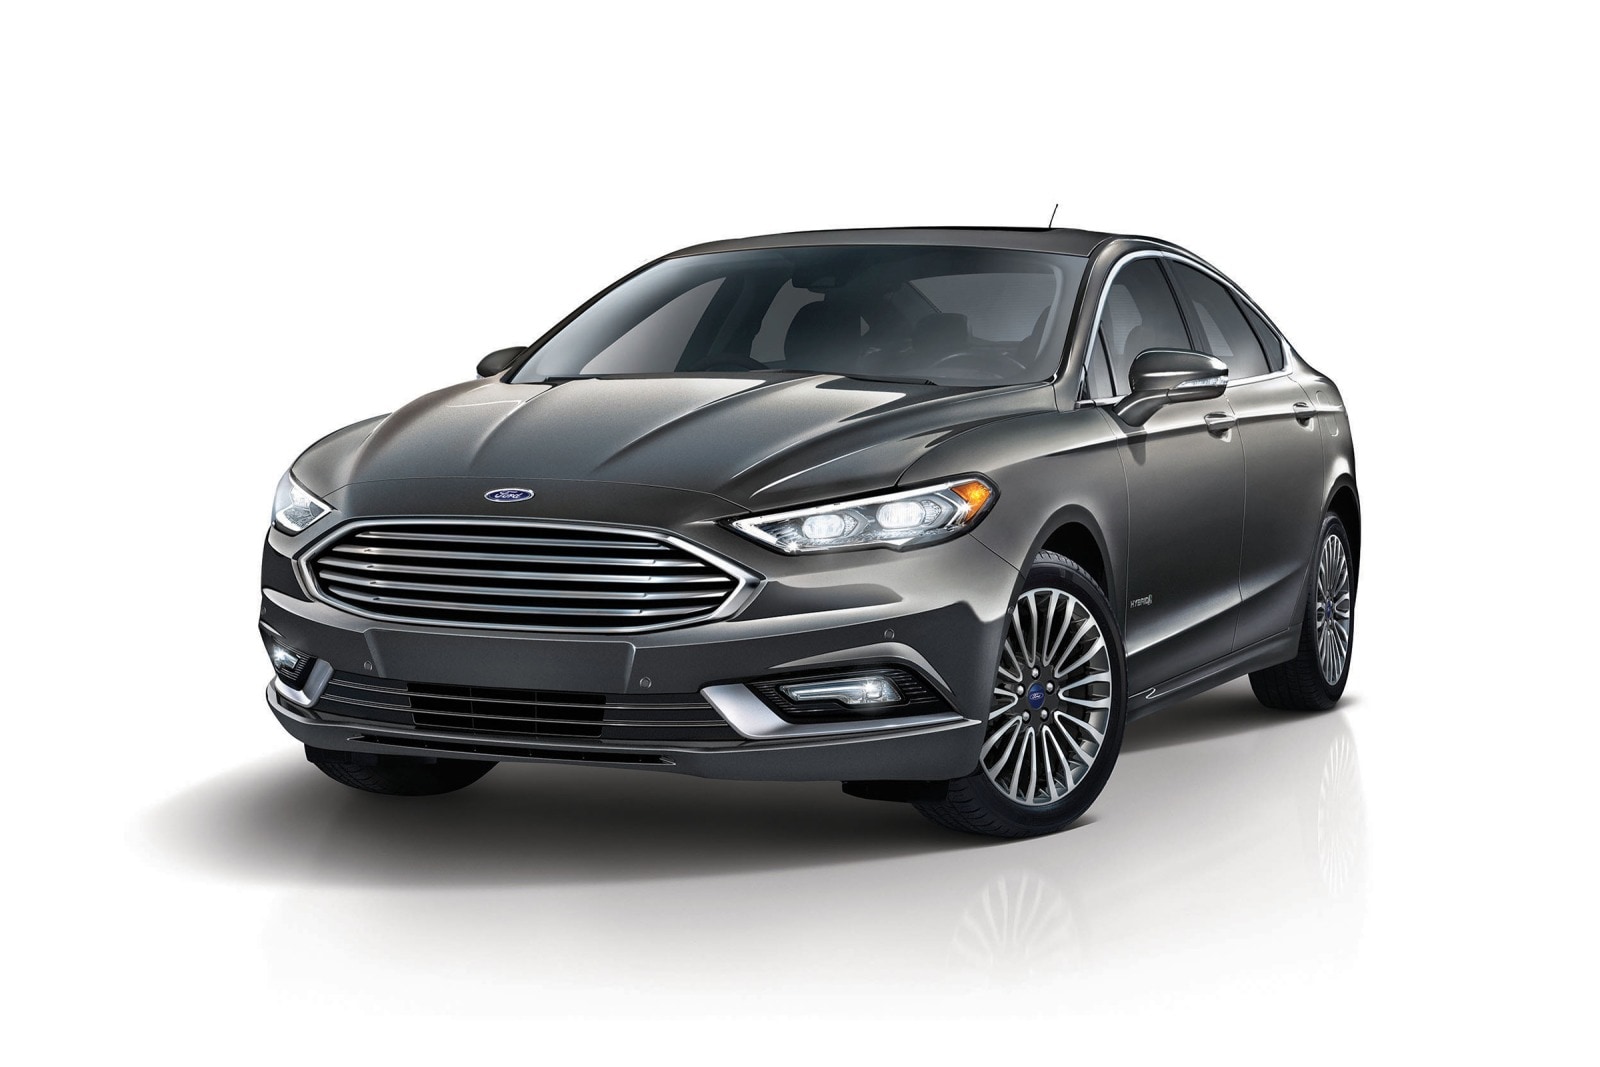 Ford In A Letter Sent To Suppliers Has Stated That The Redesign Of The Fusion For North America And The Related Mondeo For Europe Ford Fusion Fusion Sport Ford